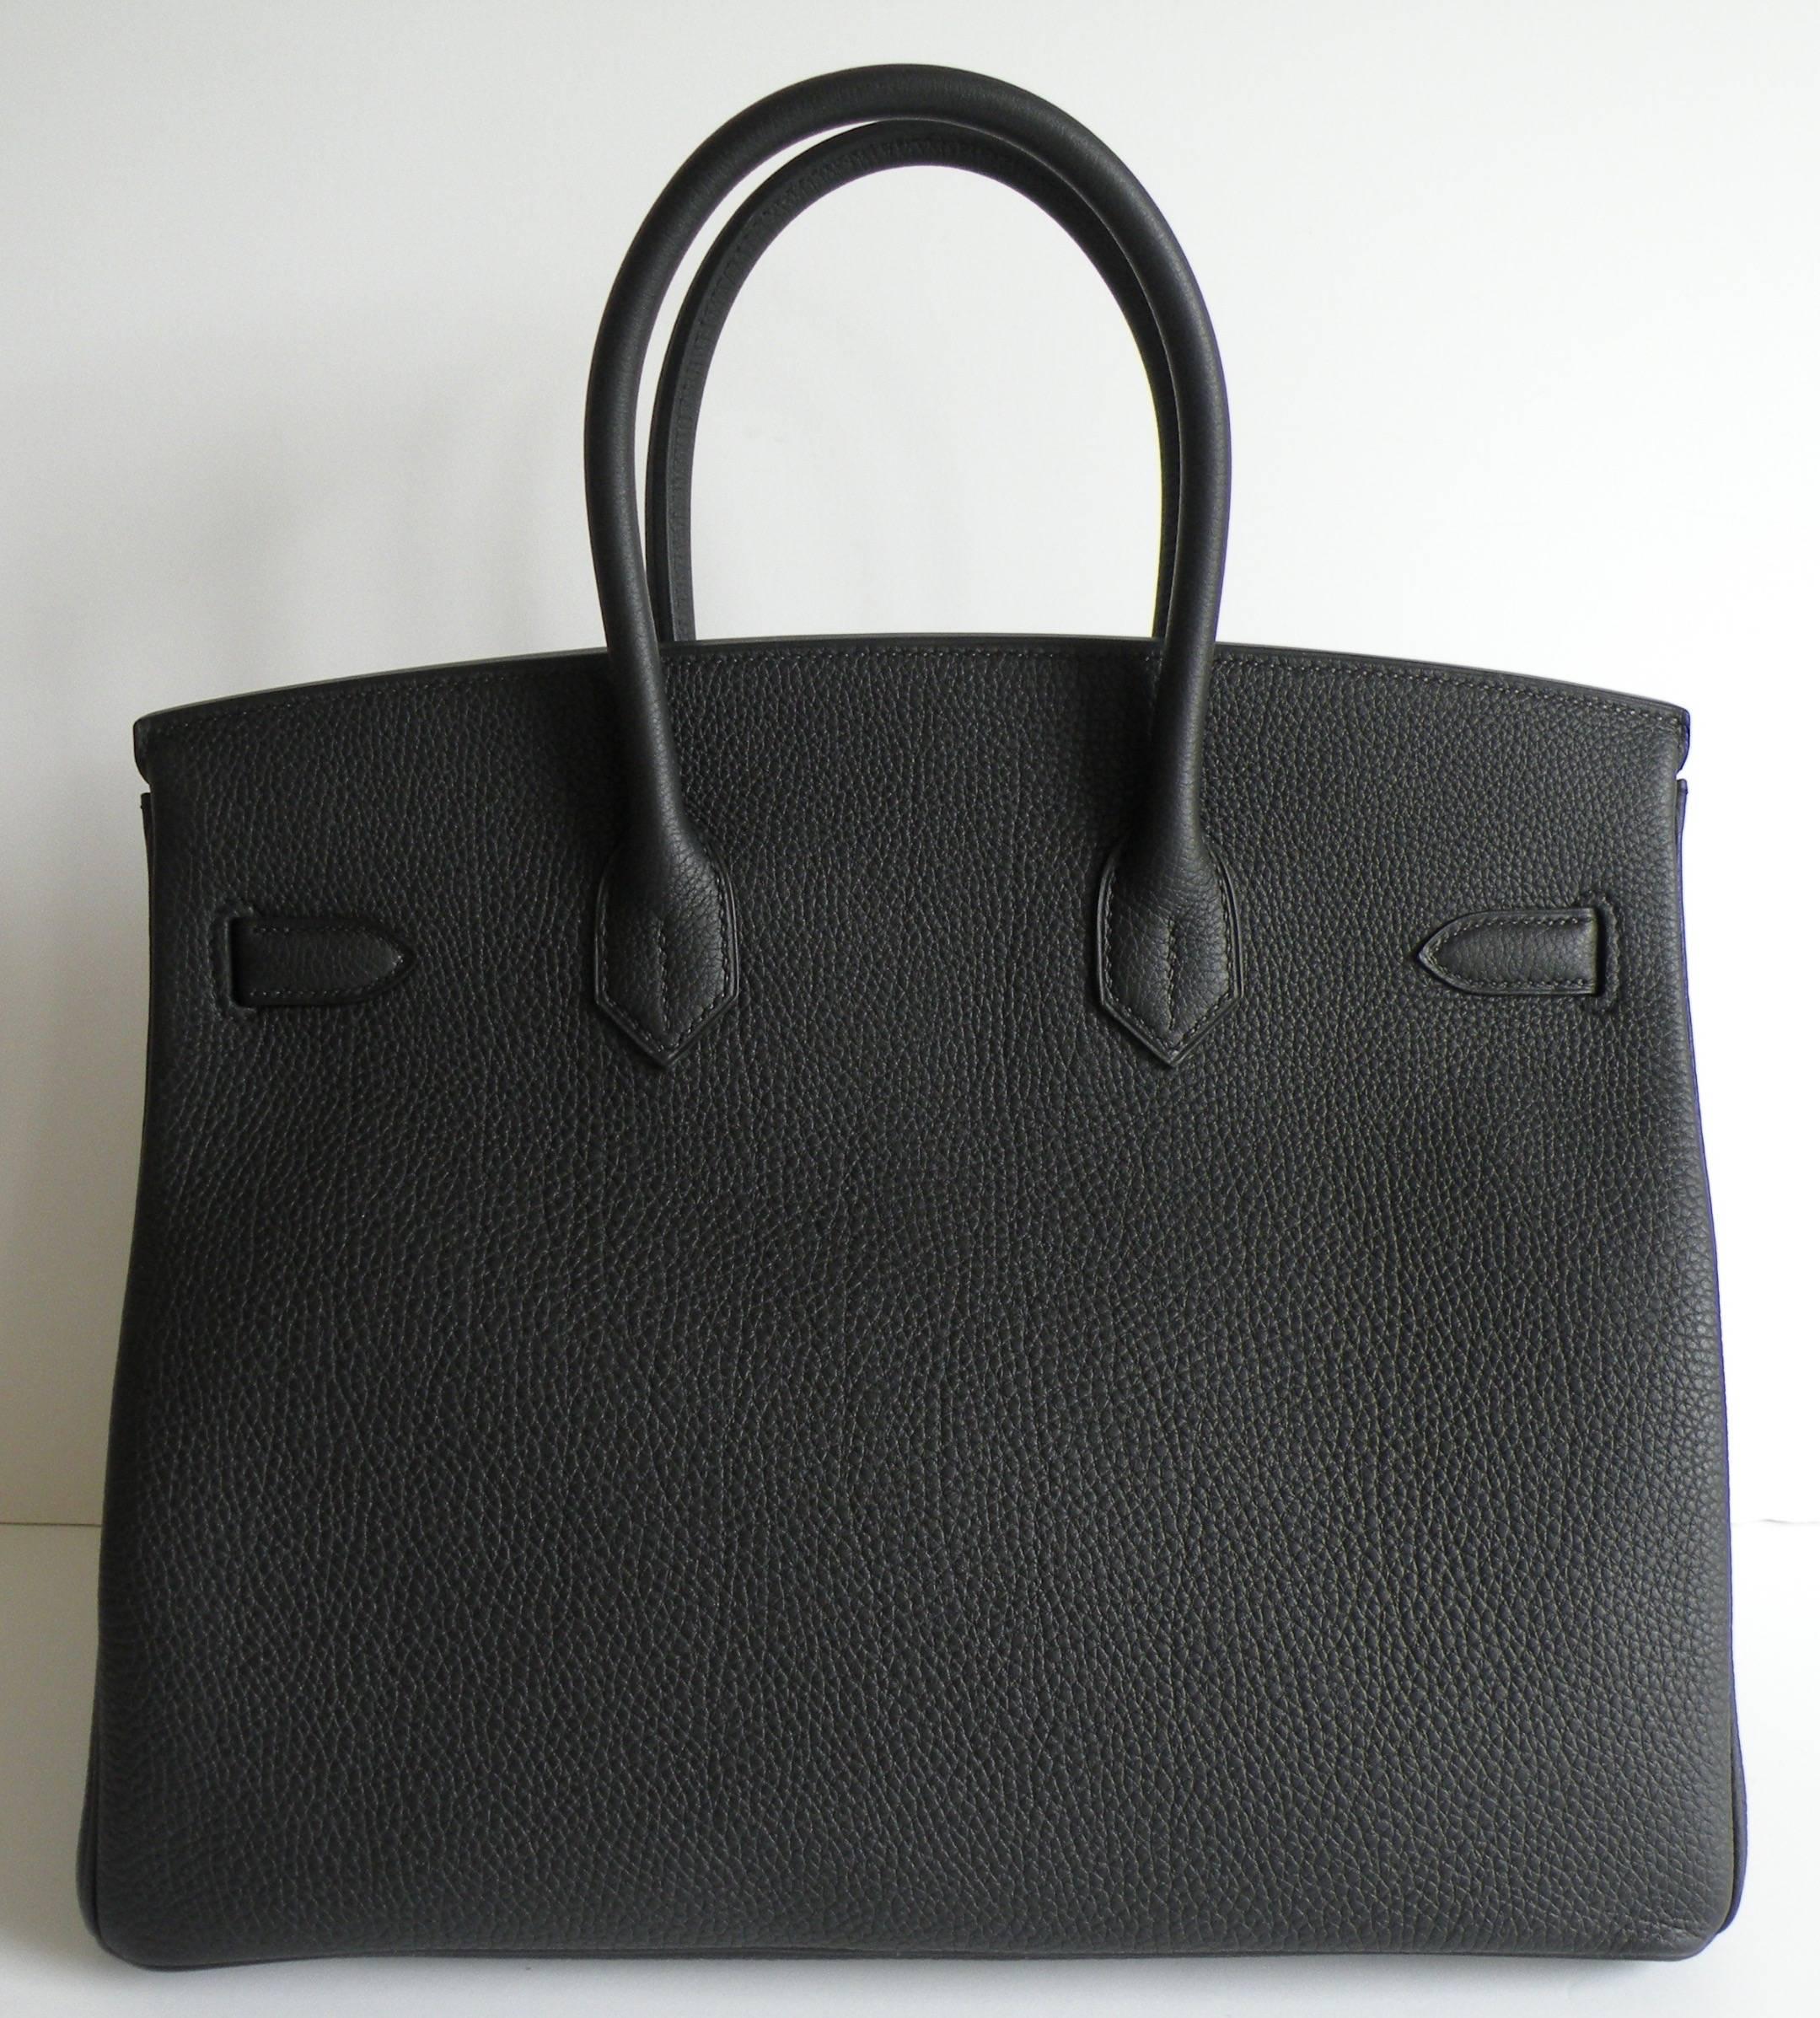 Hermes 35cm Birkin in Black Togo Leather with Gold Hardware
Togo Leather , the most durable leather.
This particular bag has an excellent shape to it.

Such a classic bag.
Black set with gold is a stunning combination.

New A stamp indicating 2017